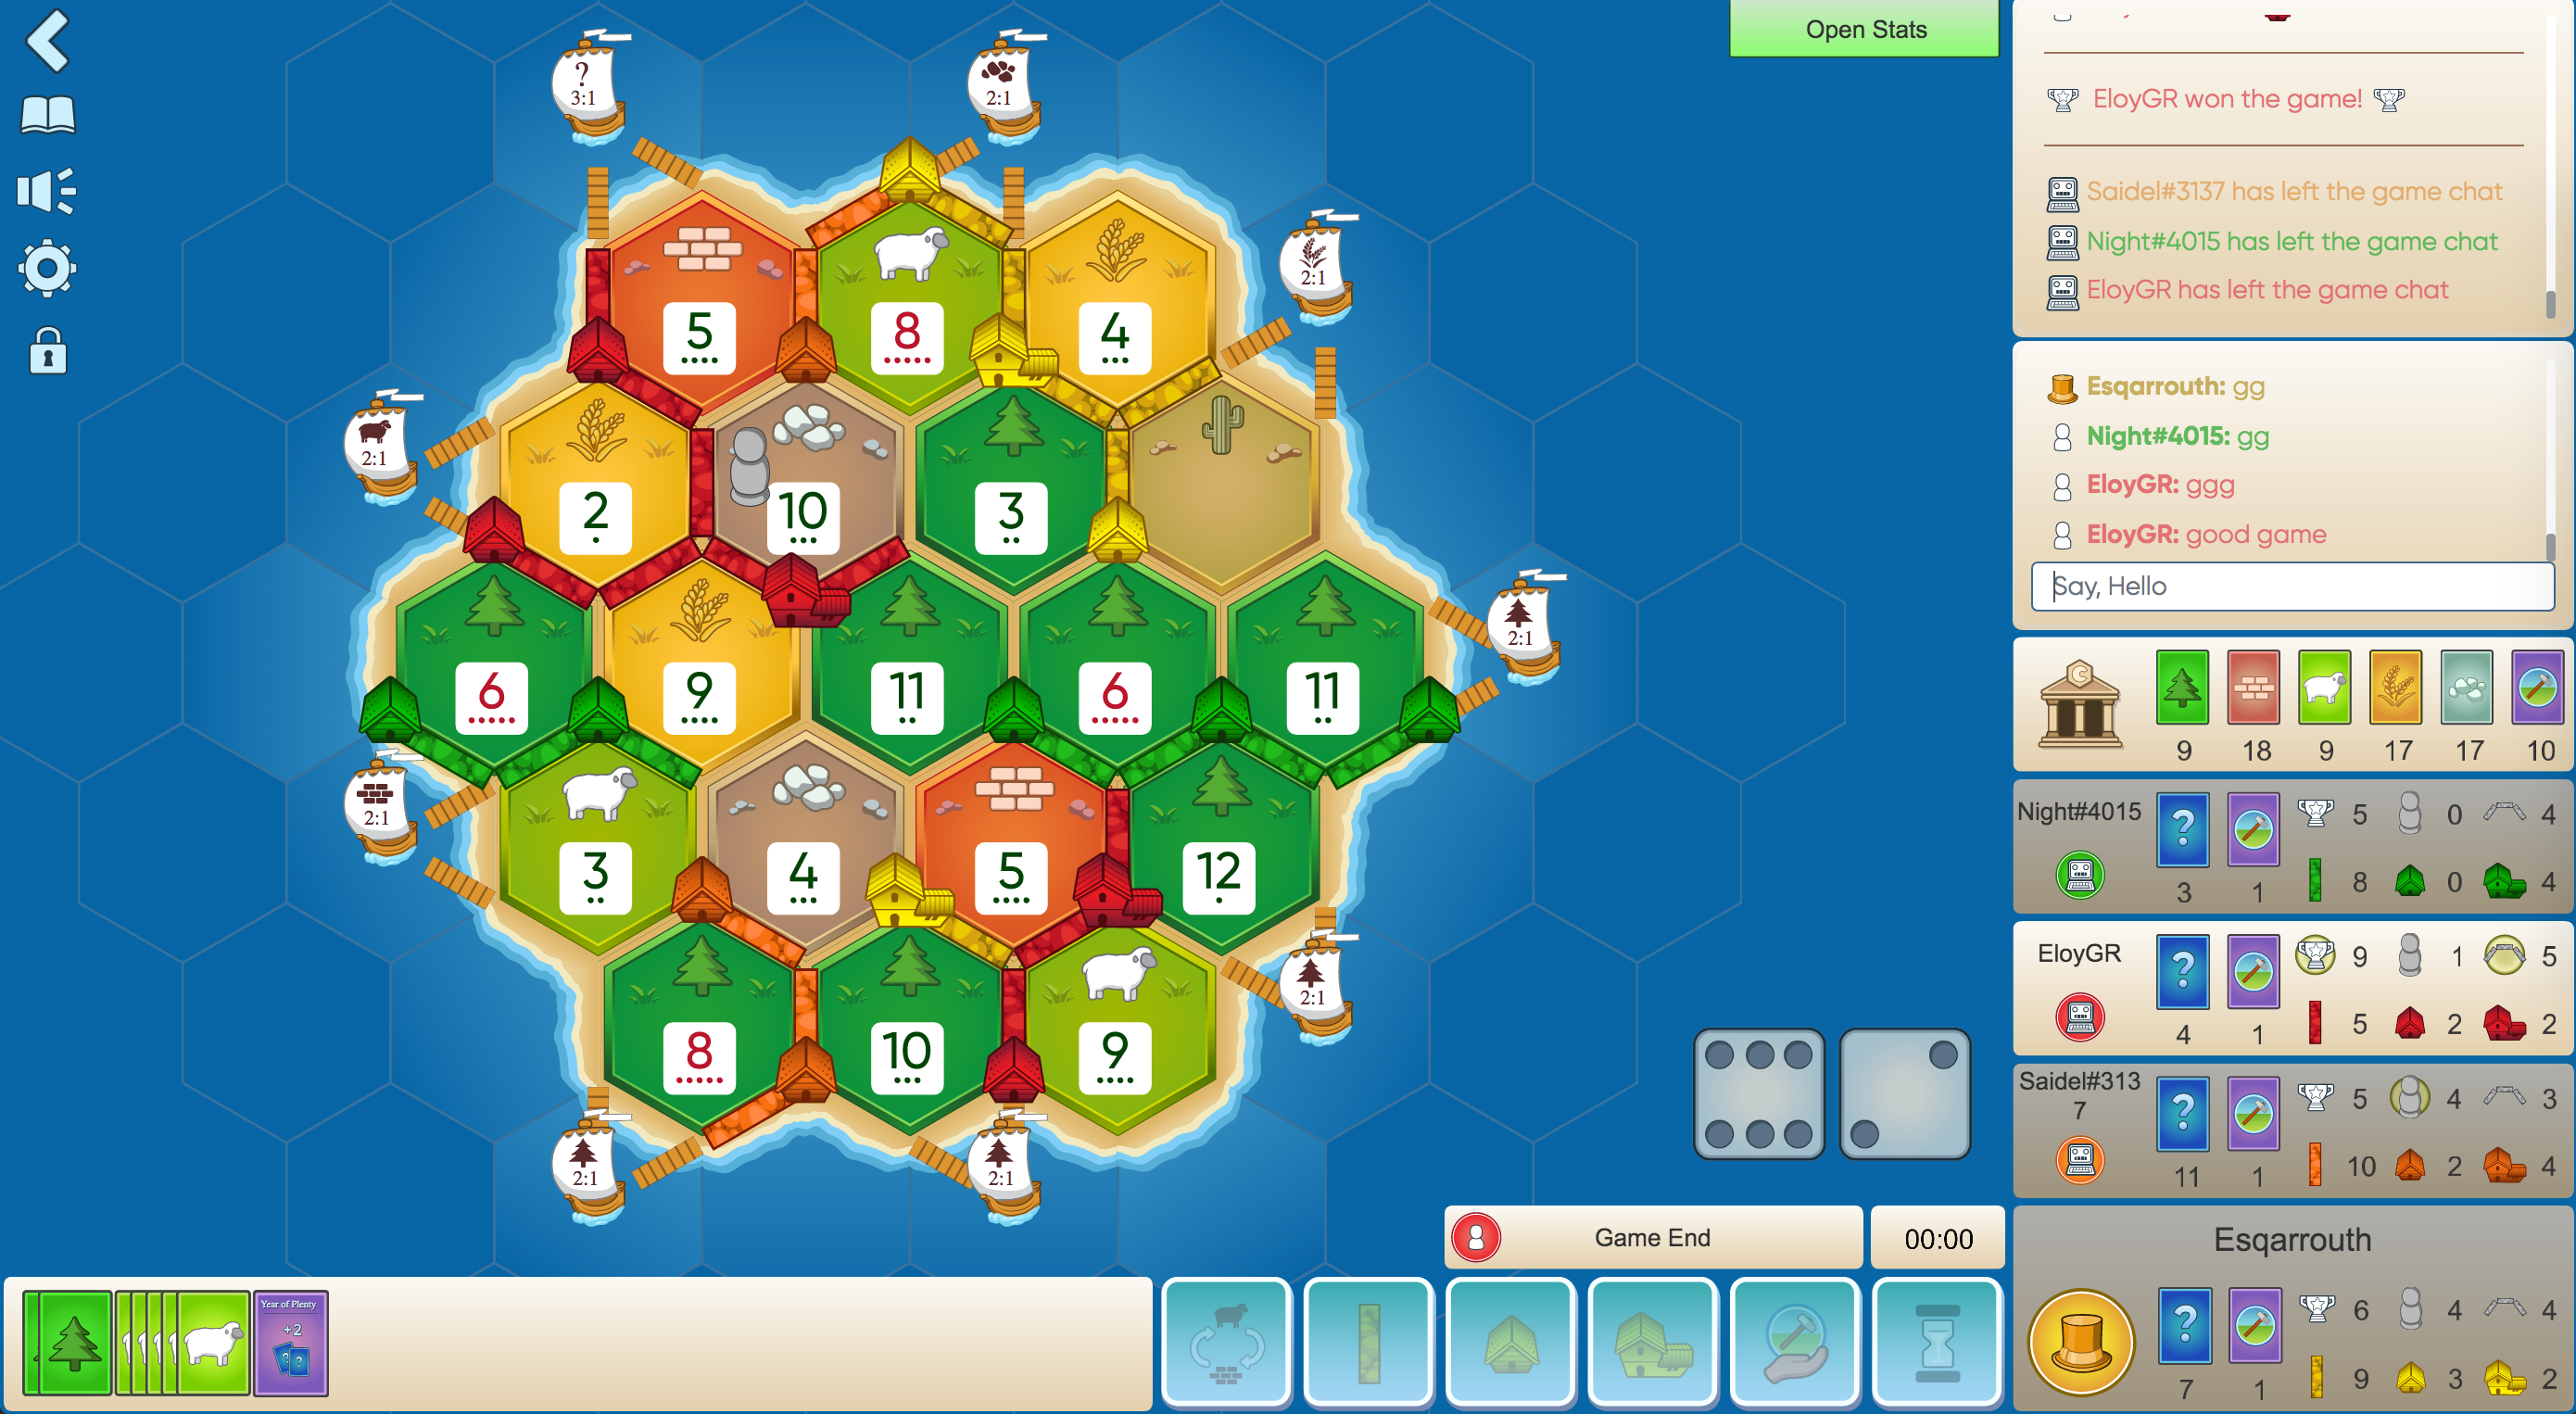 Preview image of Colonist.io (Catan)